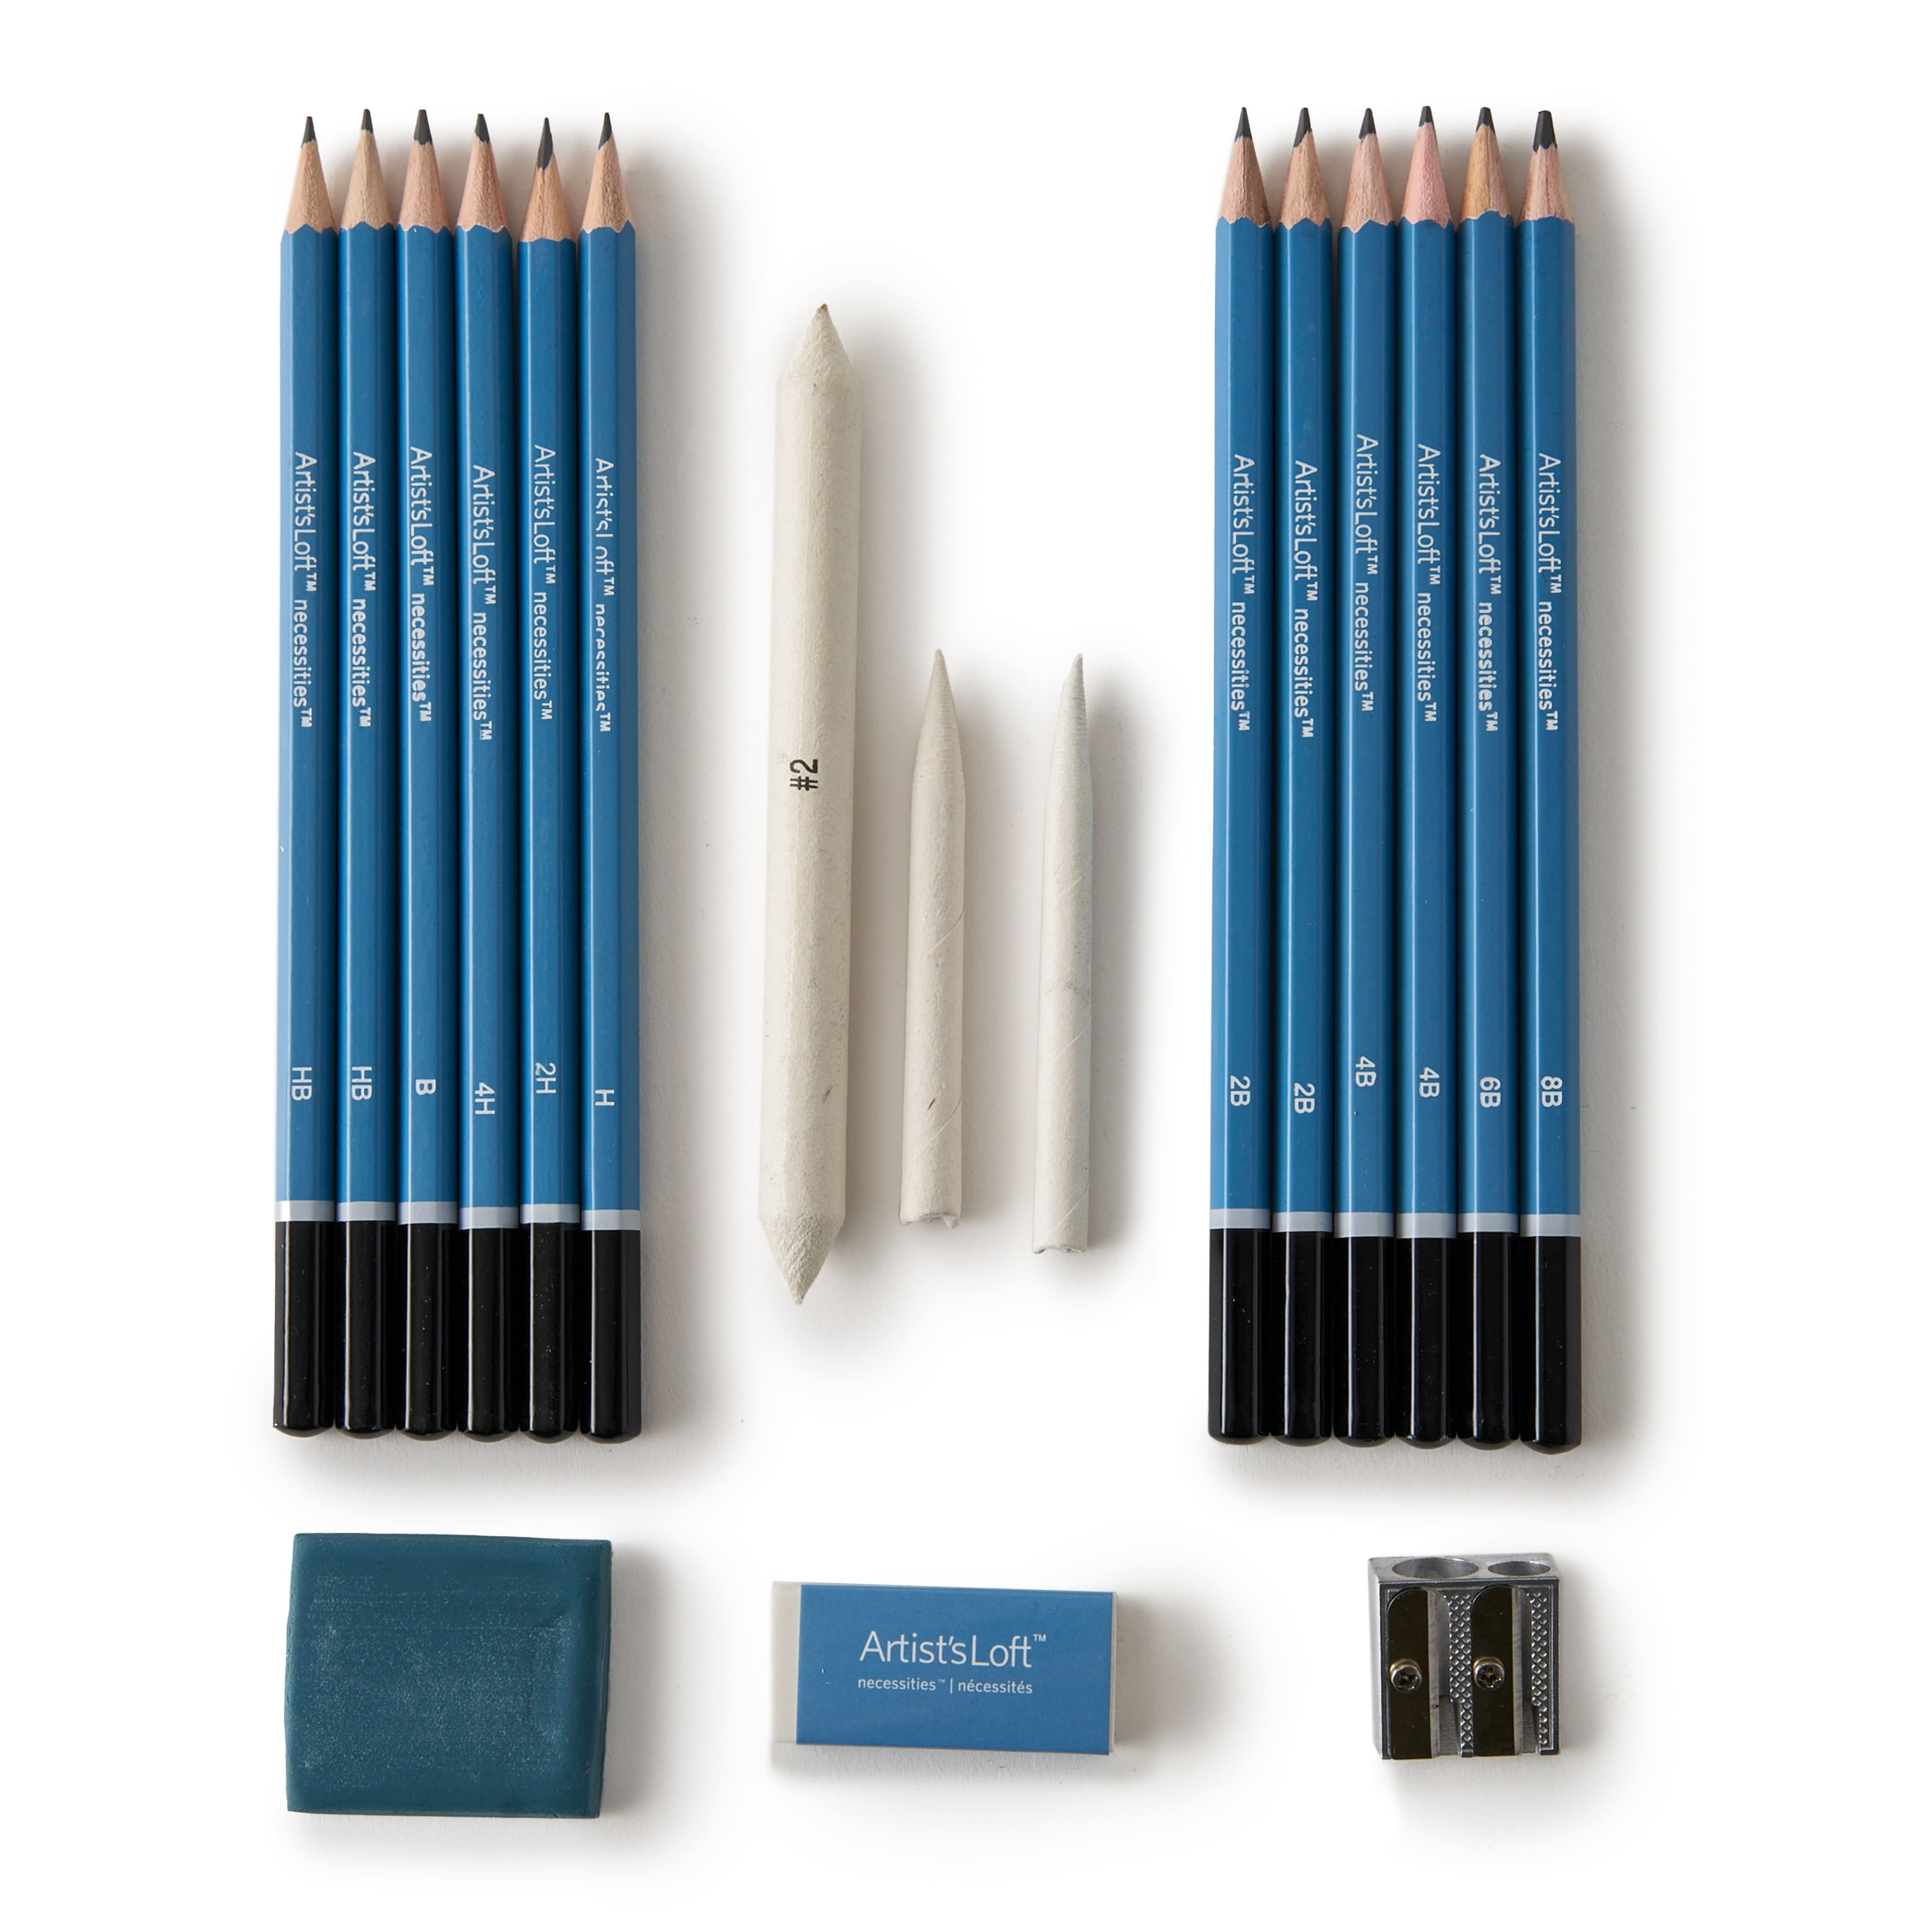 Royal & Langnickel Essentials - 157pc Sketching & Drawing Art Set, for  Beginner to Advanced Artists